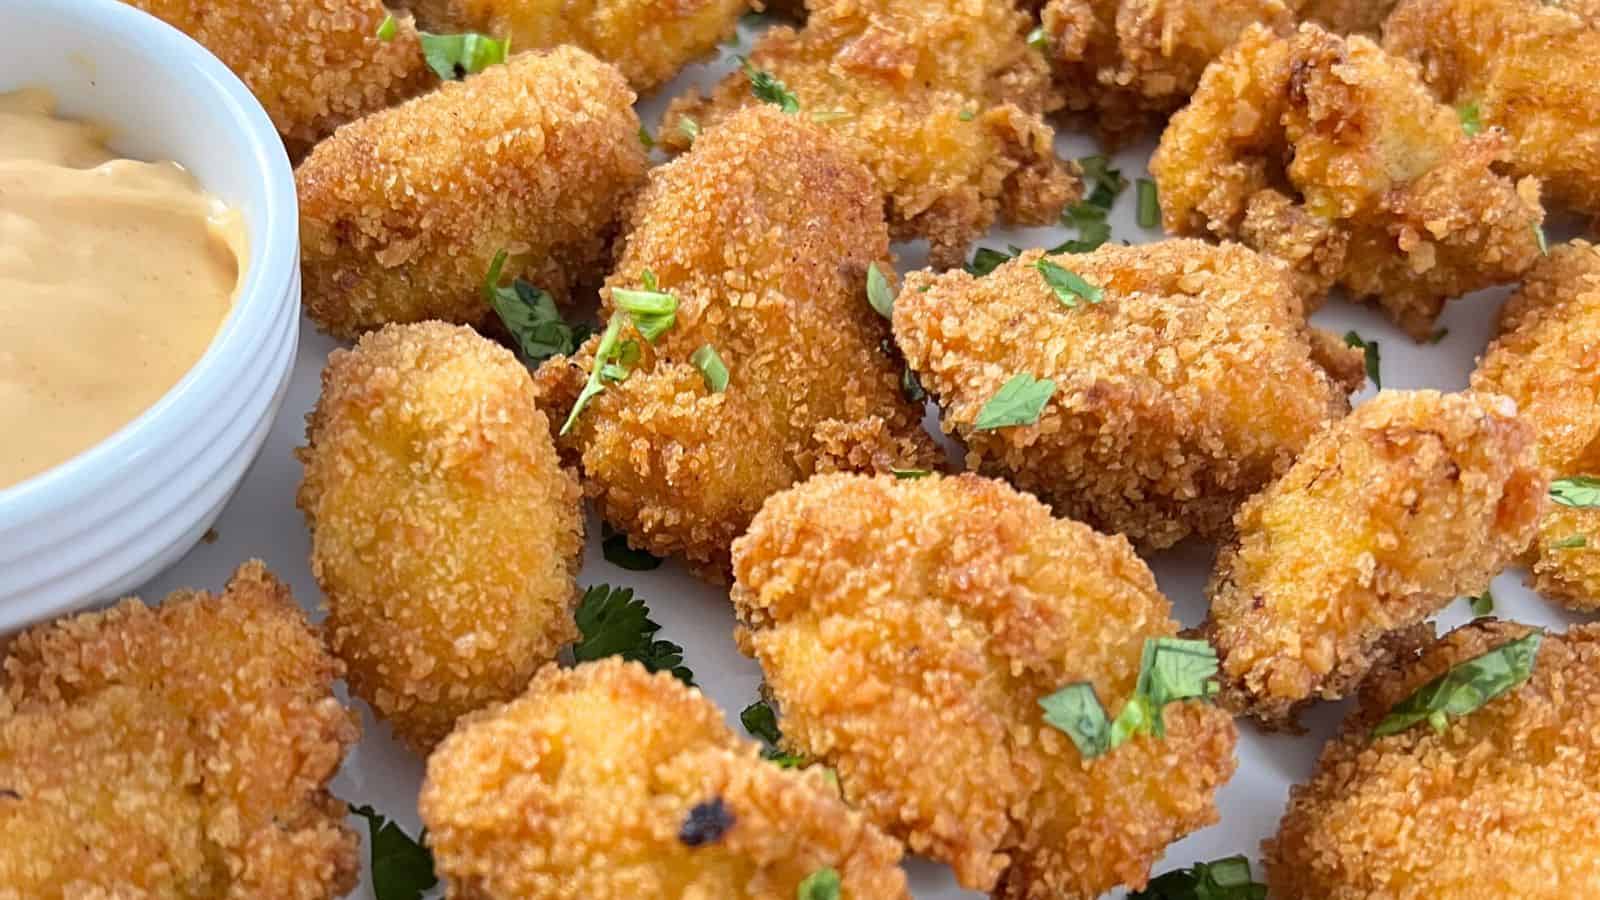 Close-up of a plate of crispy, breaded fried chicken pieces garnished with chopped herbs, accompanied by a small bowl of dipping sauce on the side.